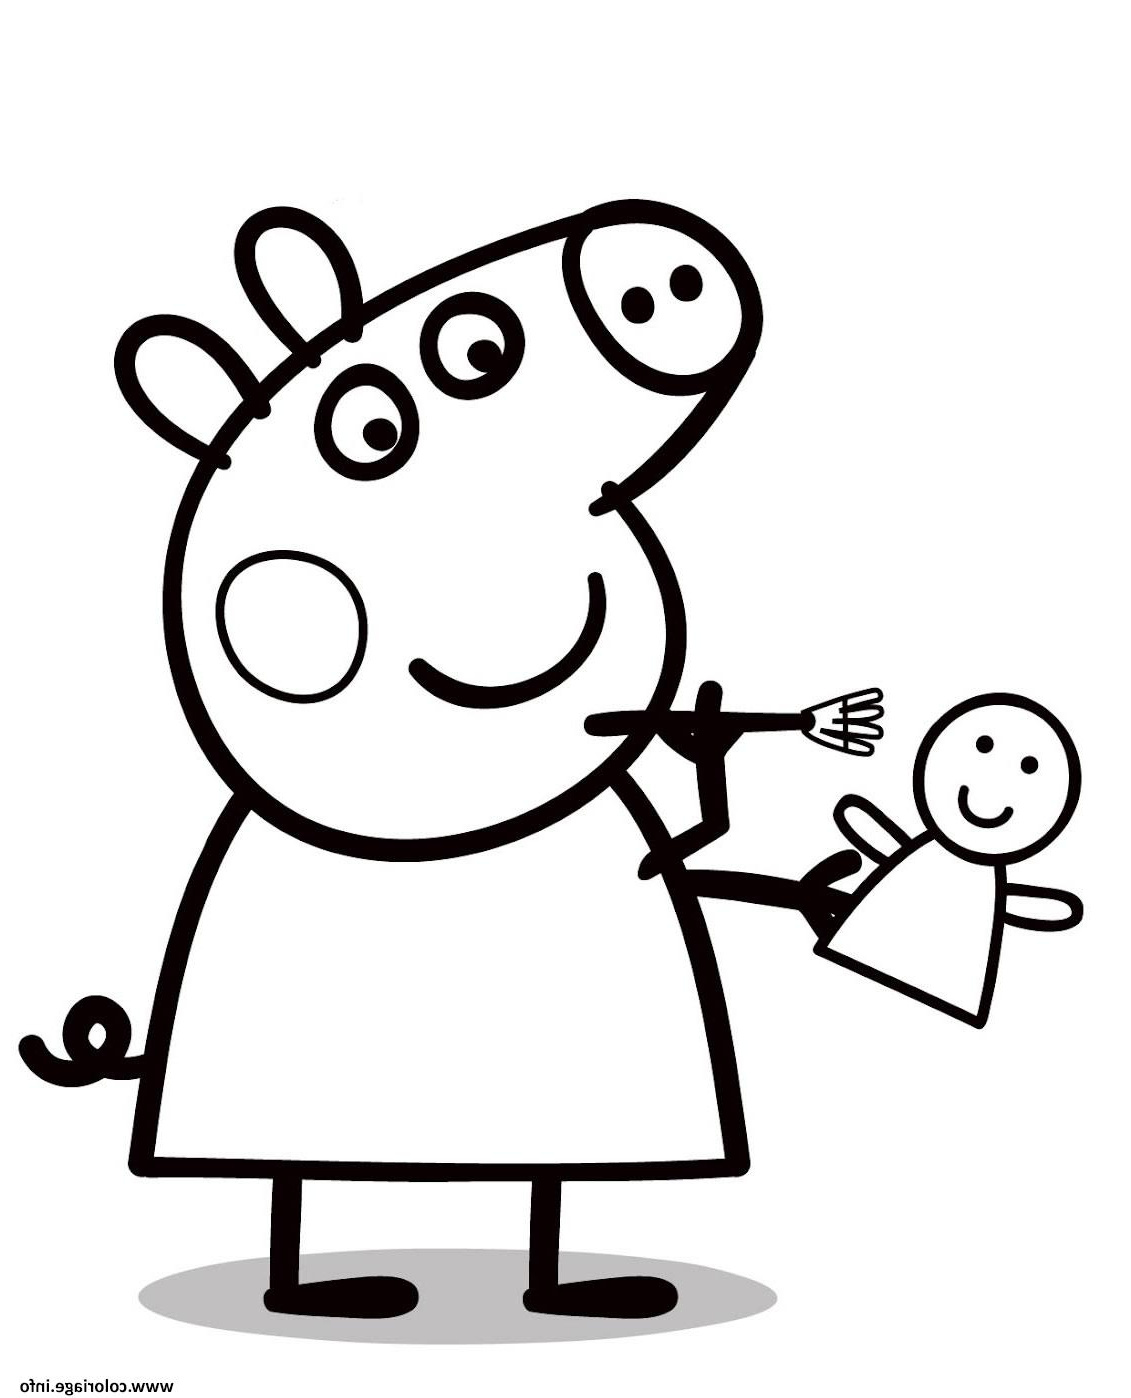 Dessin Peppa Pig Cool Image Coloriage Peppa Pig 69 Jecolorie